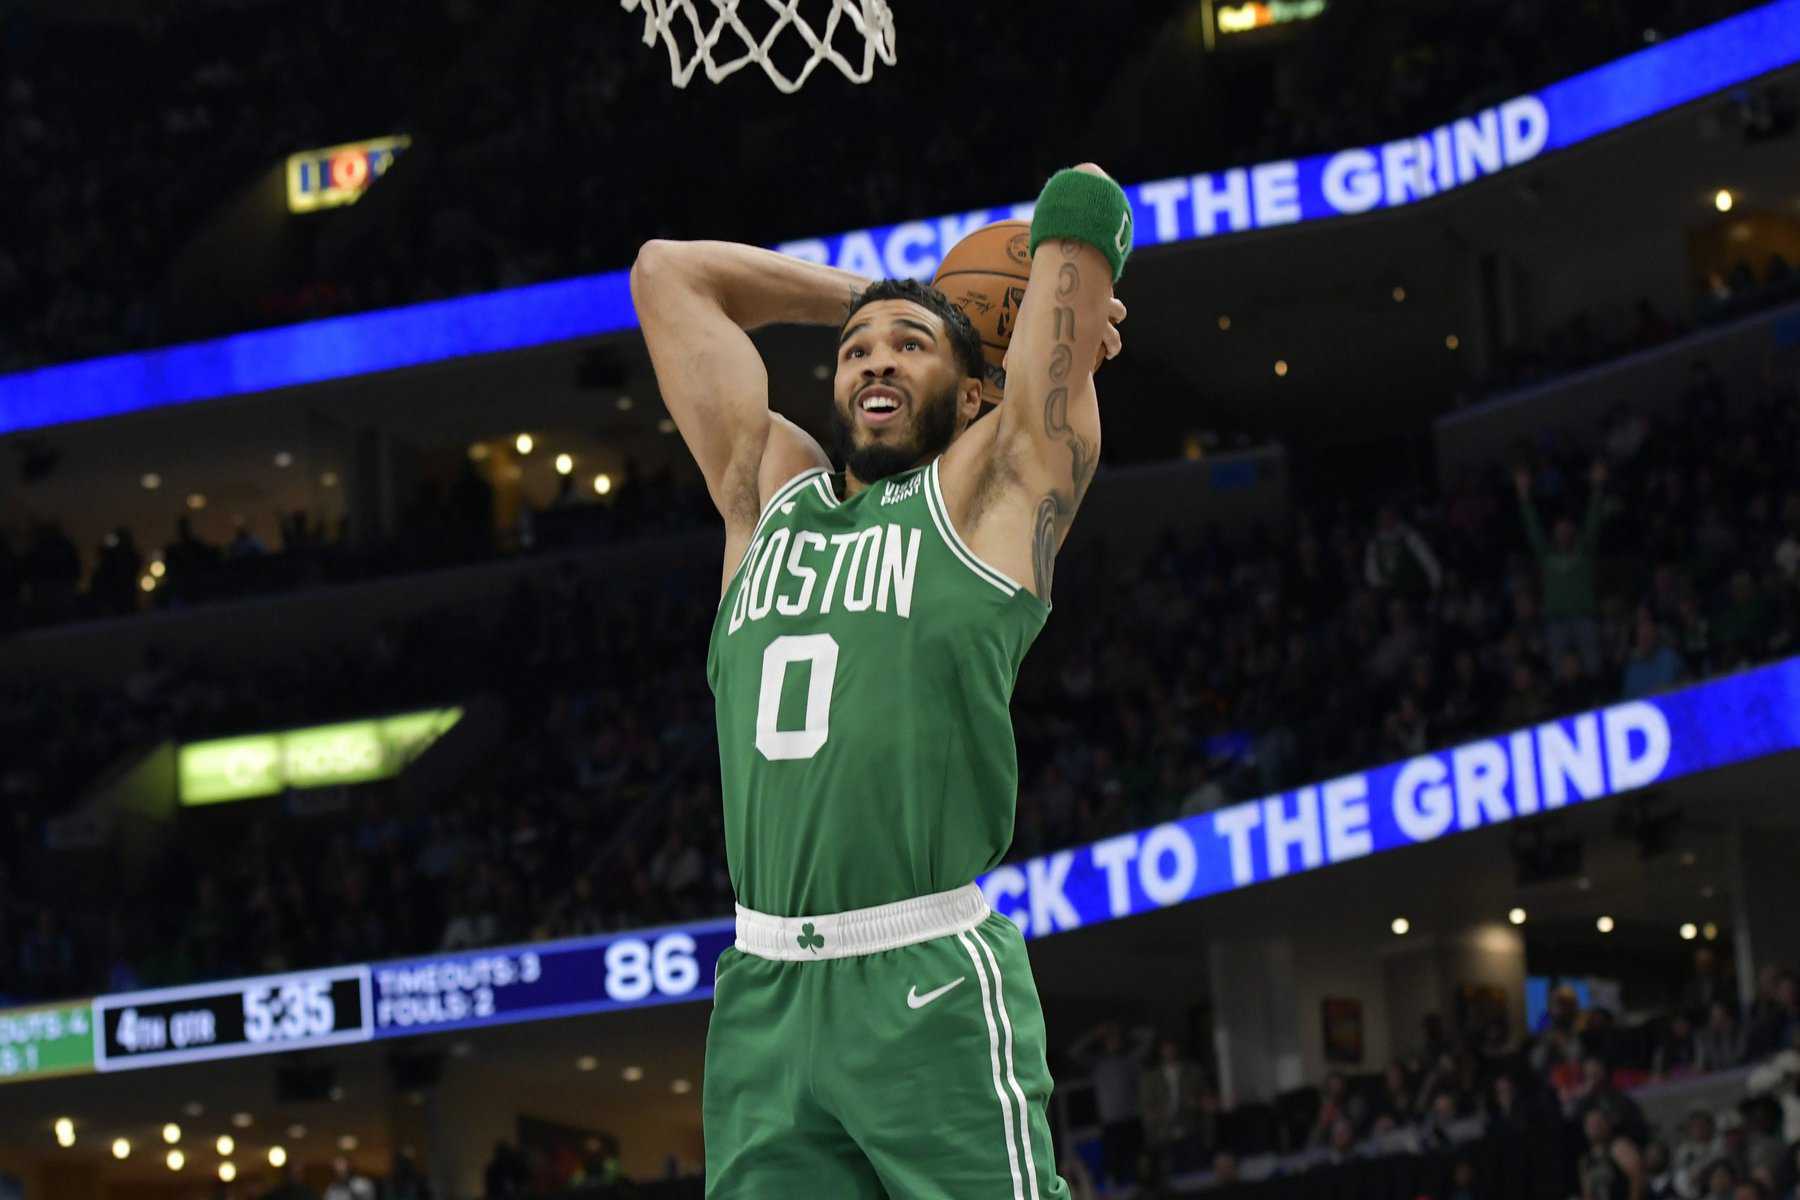 Stokastic runs over some of the best NBA DFS contrarian picks and plays for daily fantasy basketball lineups like Jayson Tatum...